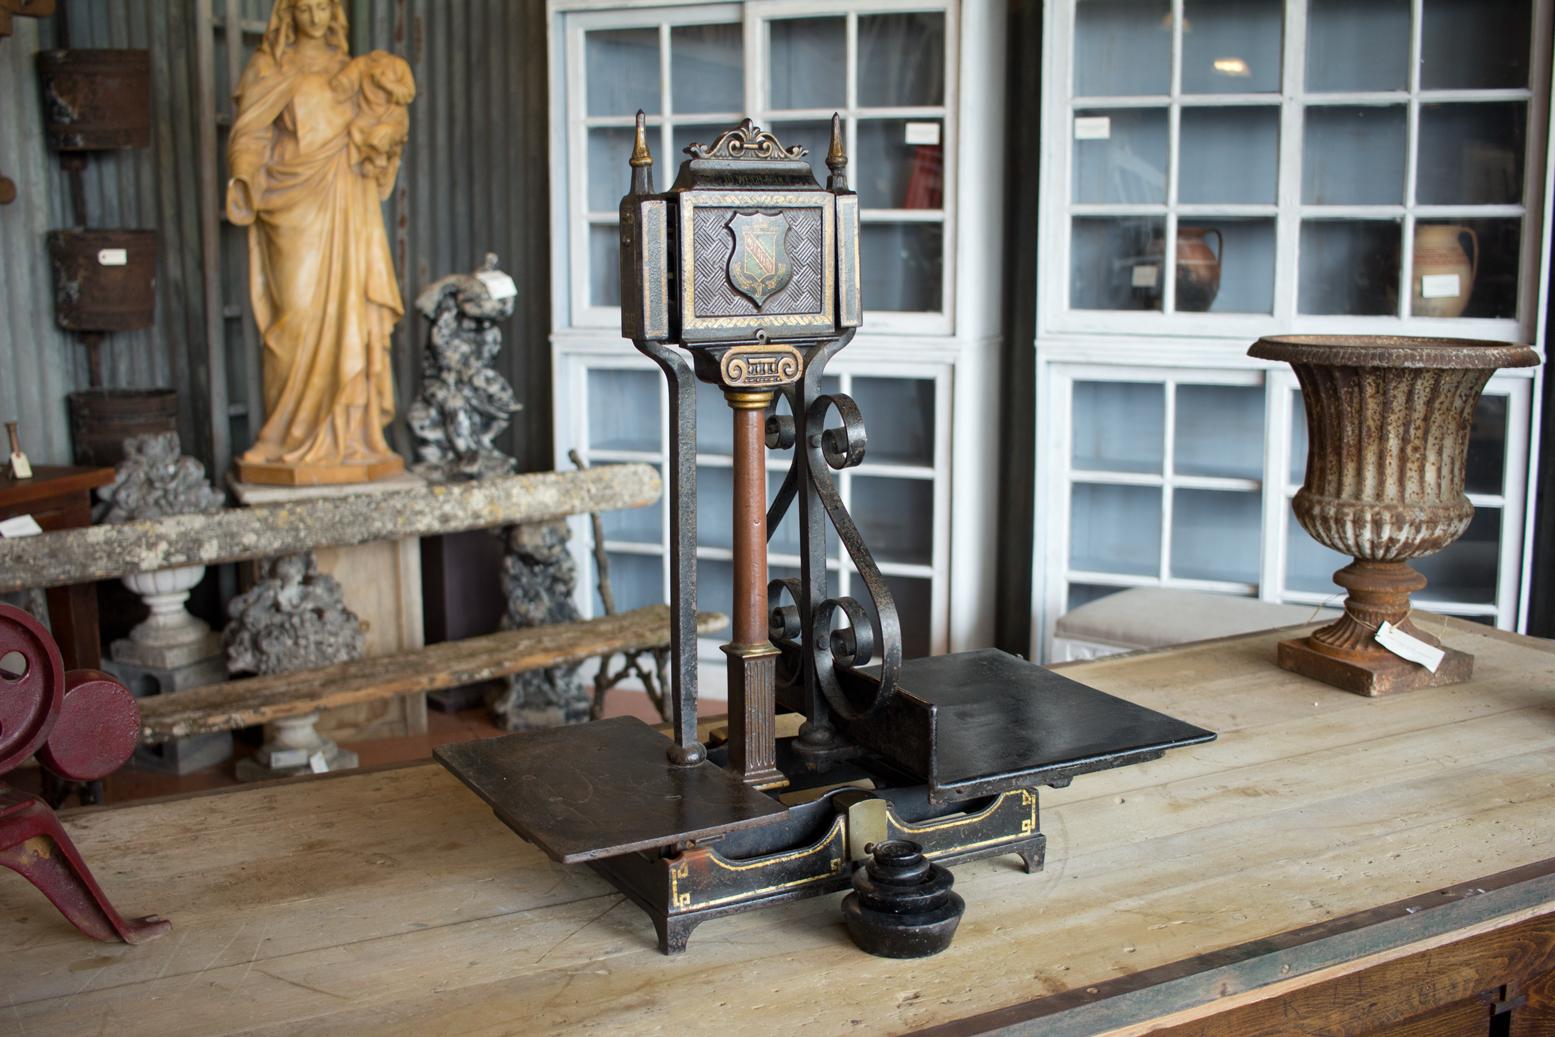 Antique balance scales with original paint and weights. The front has a crest of the Royal Warranted Coat of Arms inscribed W & T Avery, Birmingham, England.

The company was founded in the early 1700s and took the name W & T Avery in 1818.